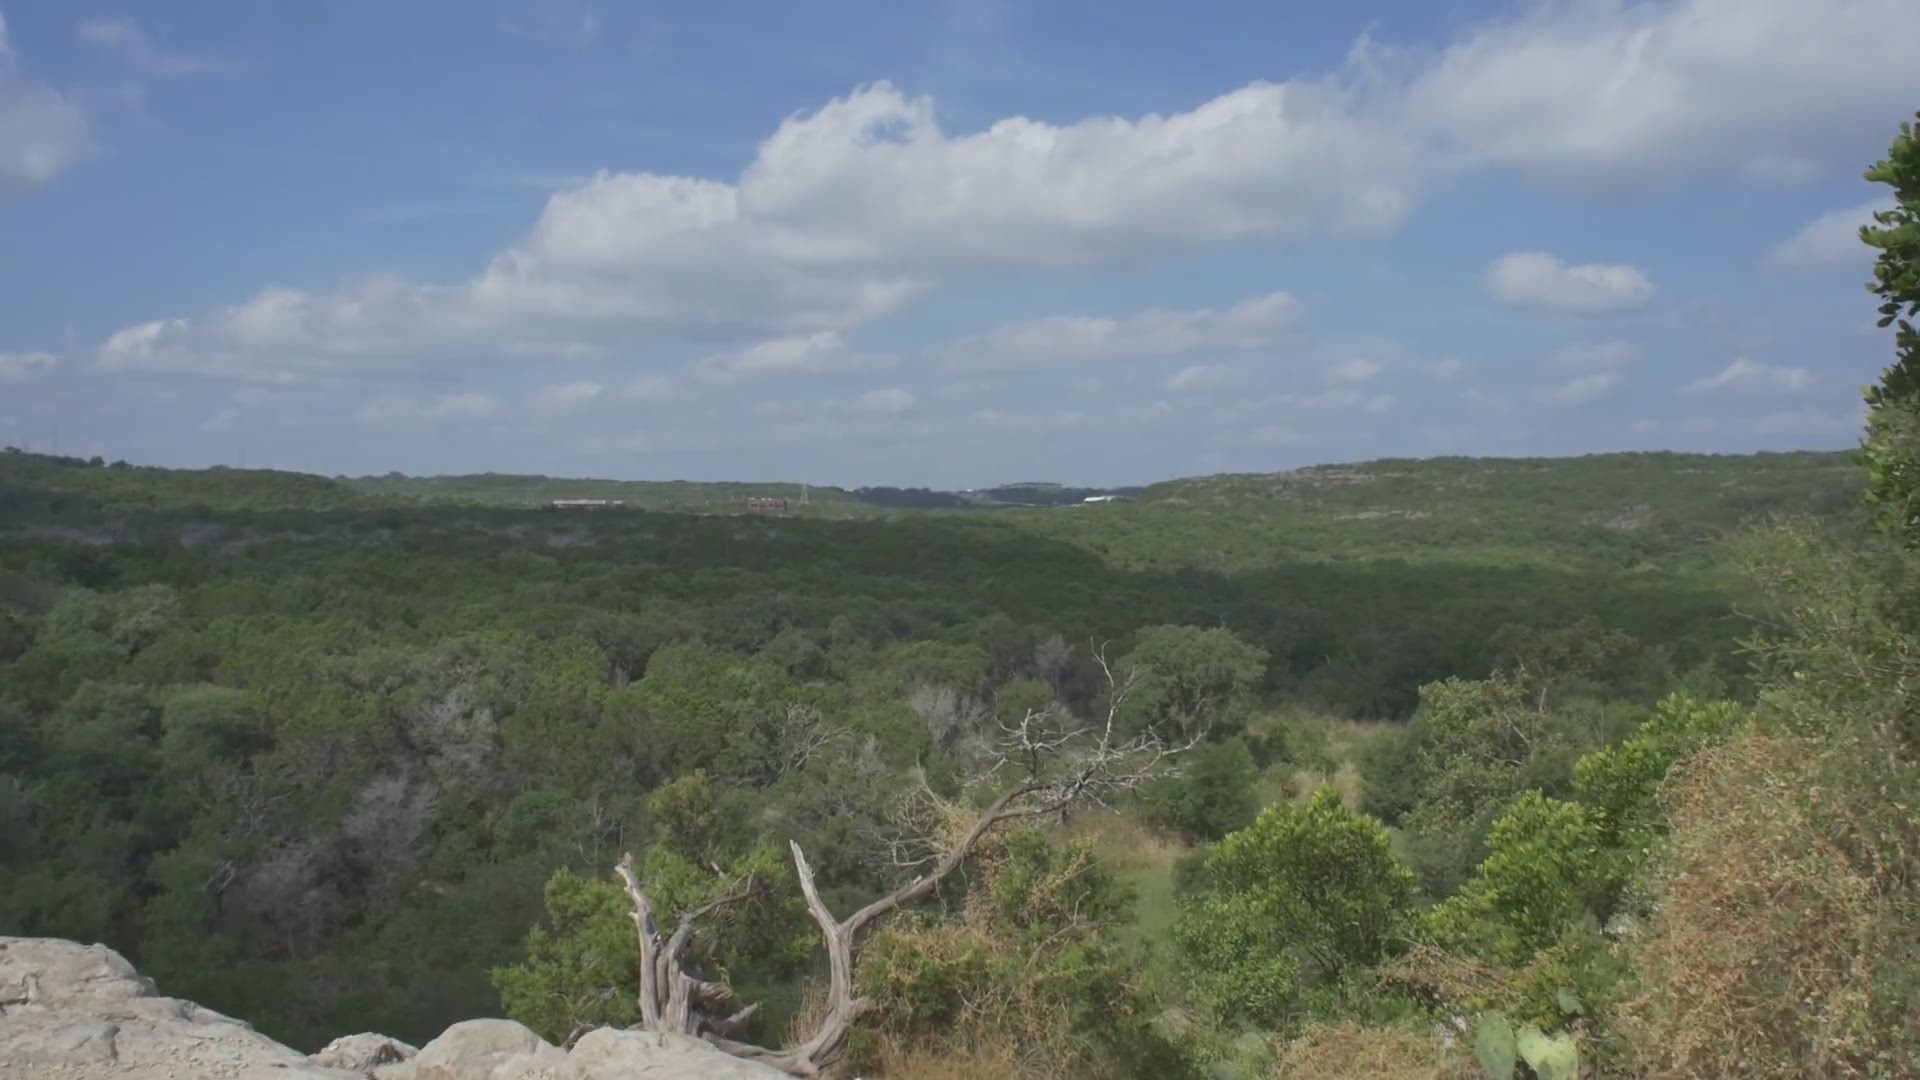 A video from Austin Parks Foundation about the important place parks hold for the city and people of Austin, and how APF helps maintain and improve them.